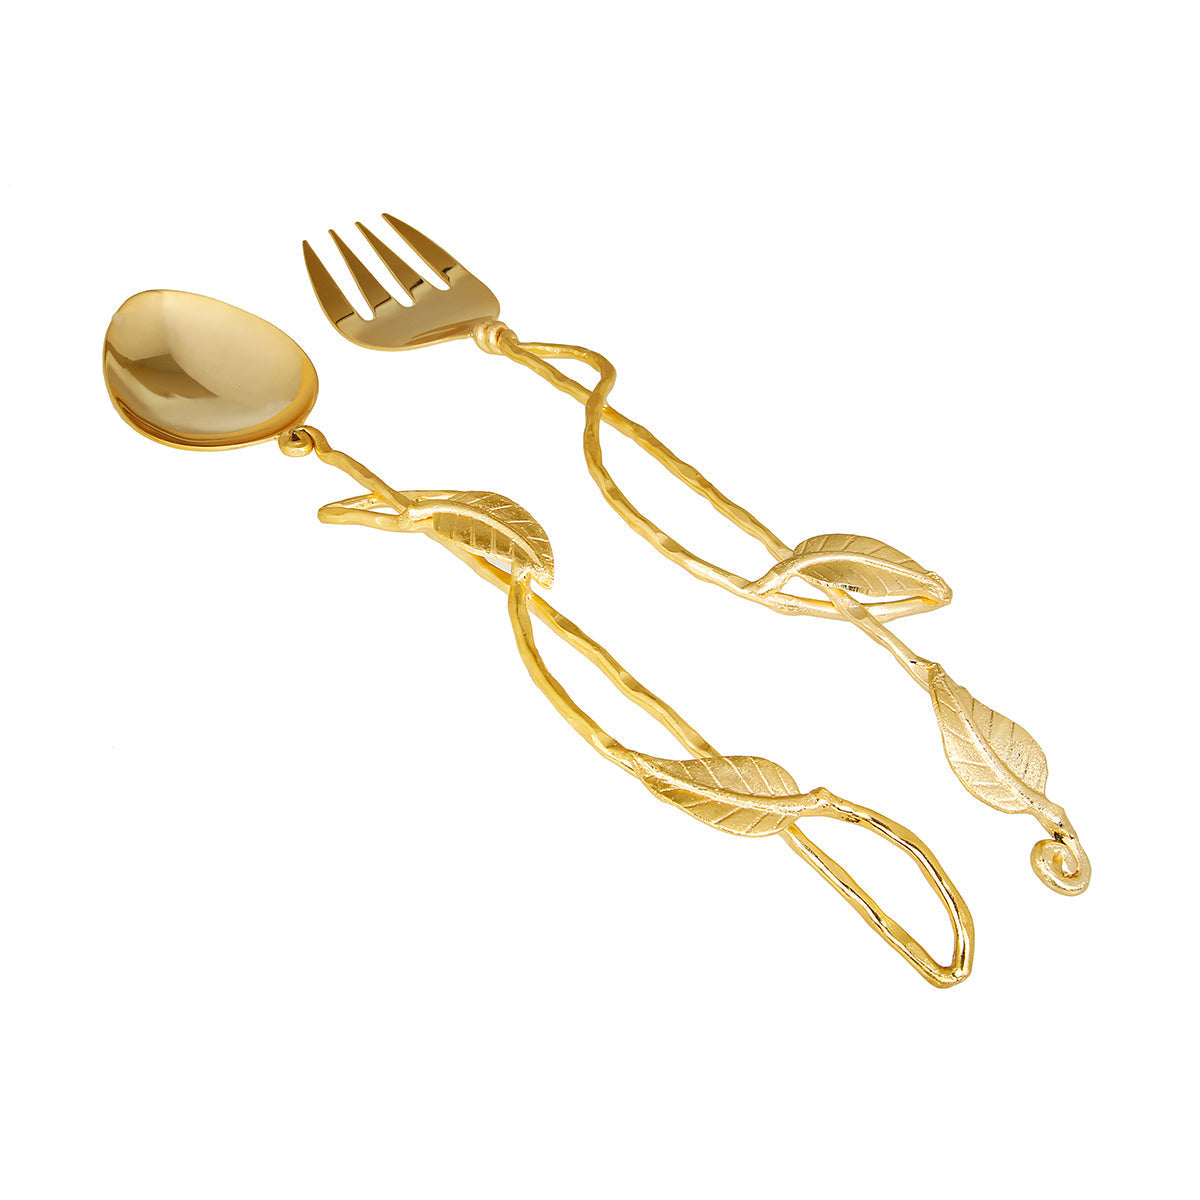 Gold Stainless Steel Serving Spoon 35cm -  luxware-uk.myshopify.com